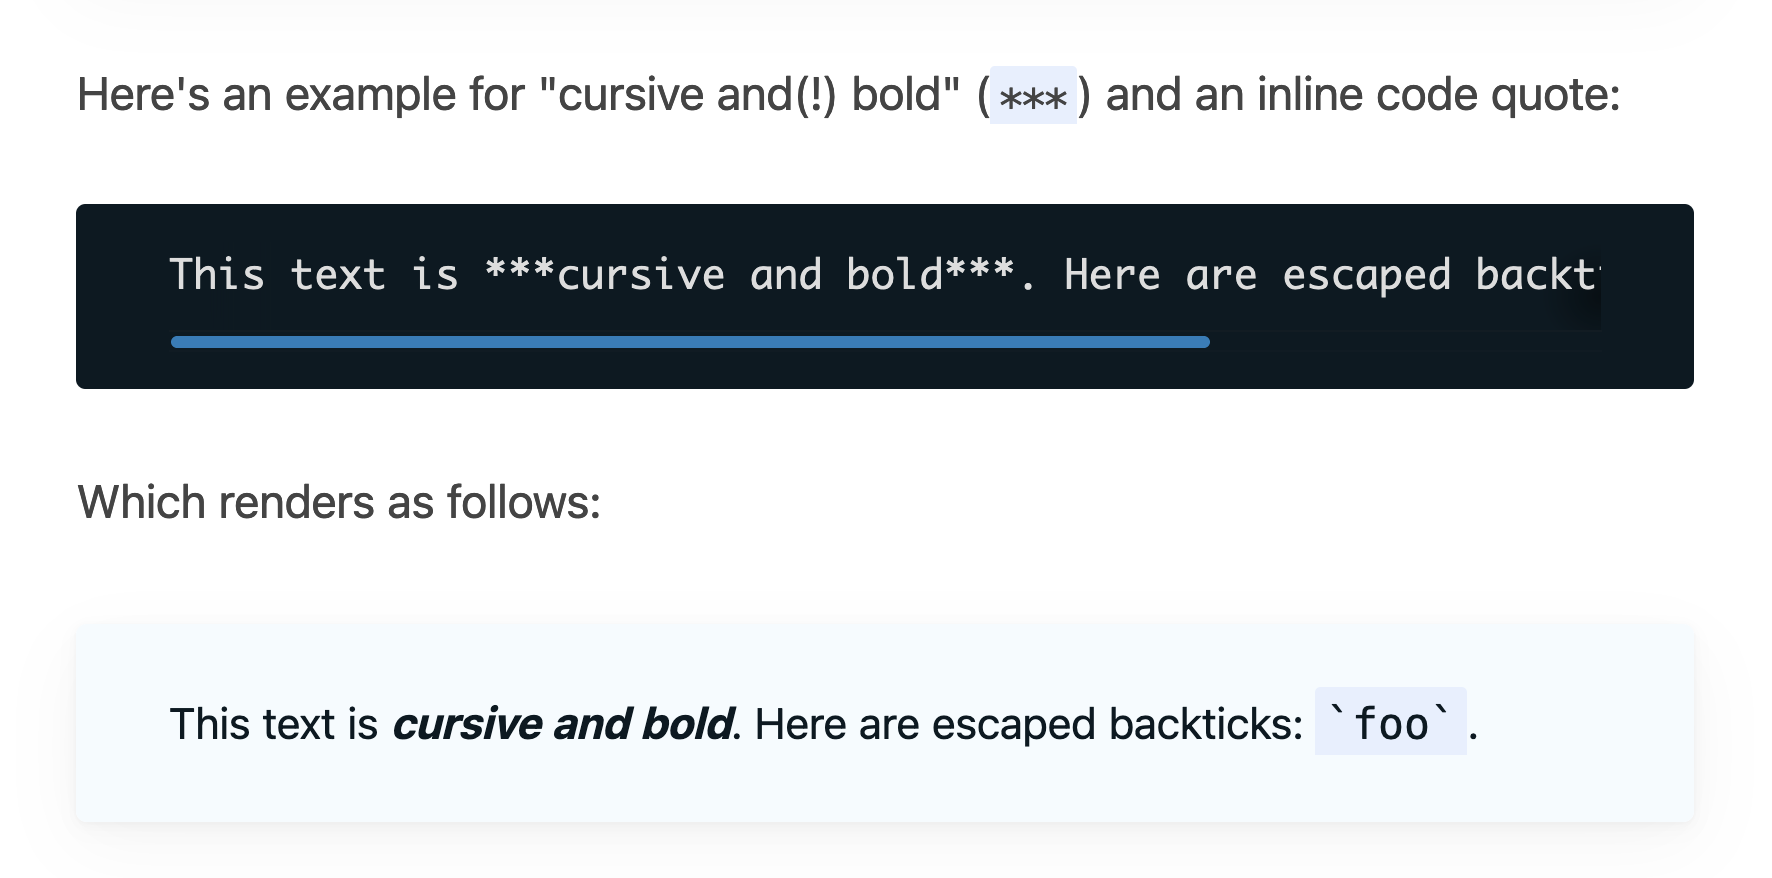 Here's an example for "cursive and(!) bold" (***) and an inline code quote:  This text is ***cursive and bold***. Here are escaped backticks: `` `foo` ``.  Which renders as follows:  This text is cursive and bold. Here are escaped backticks: `foo`.